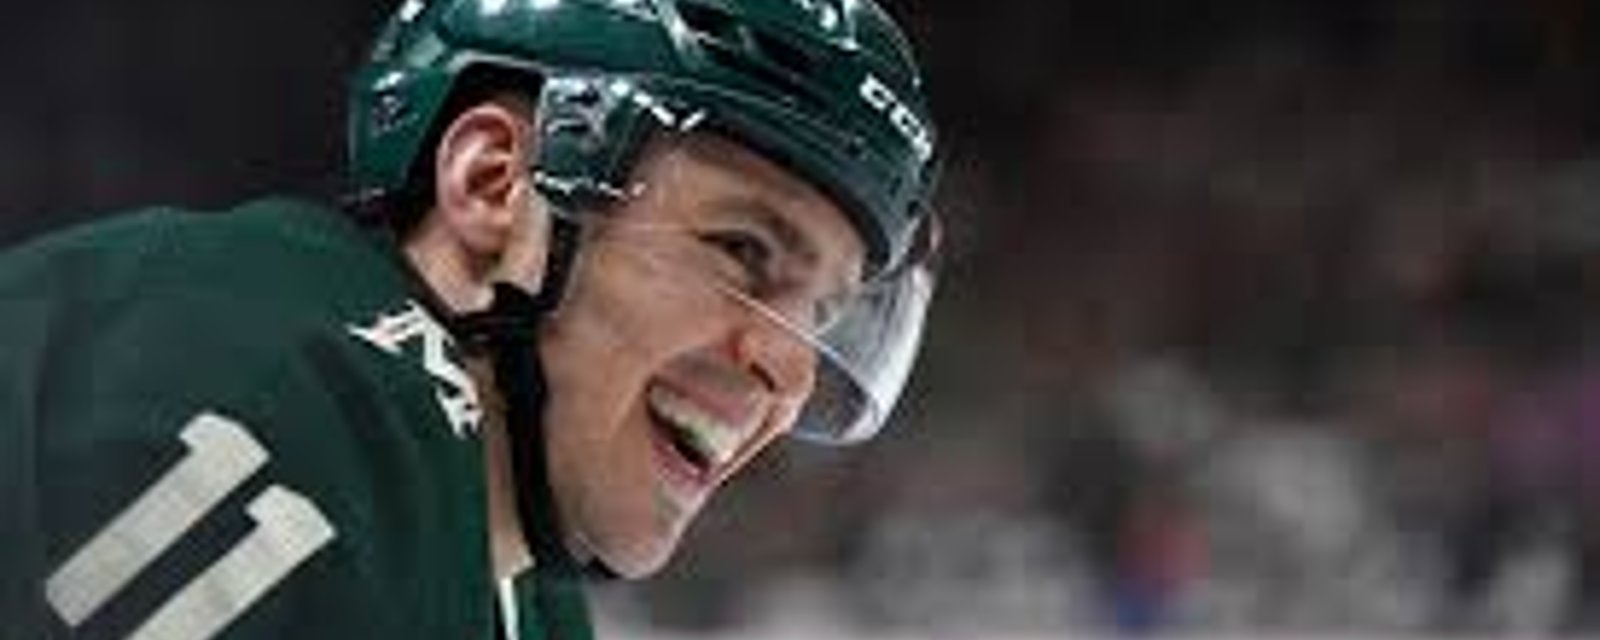 Zack Parise’s daughter burns her own father at school 